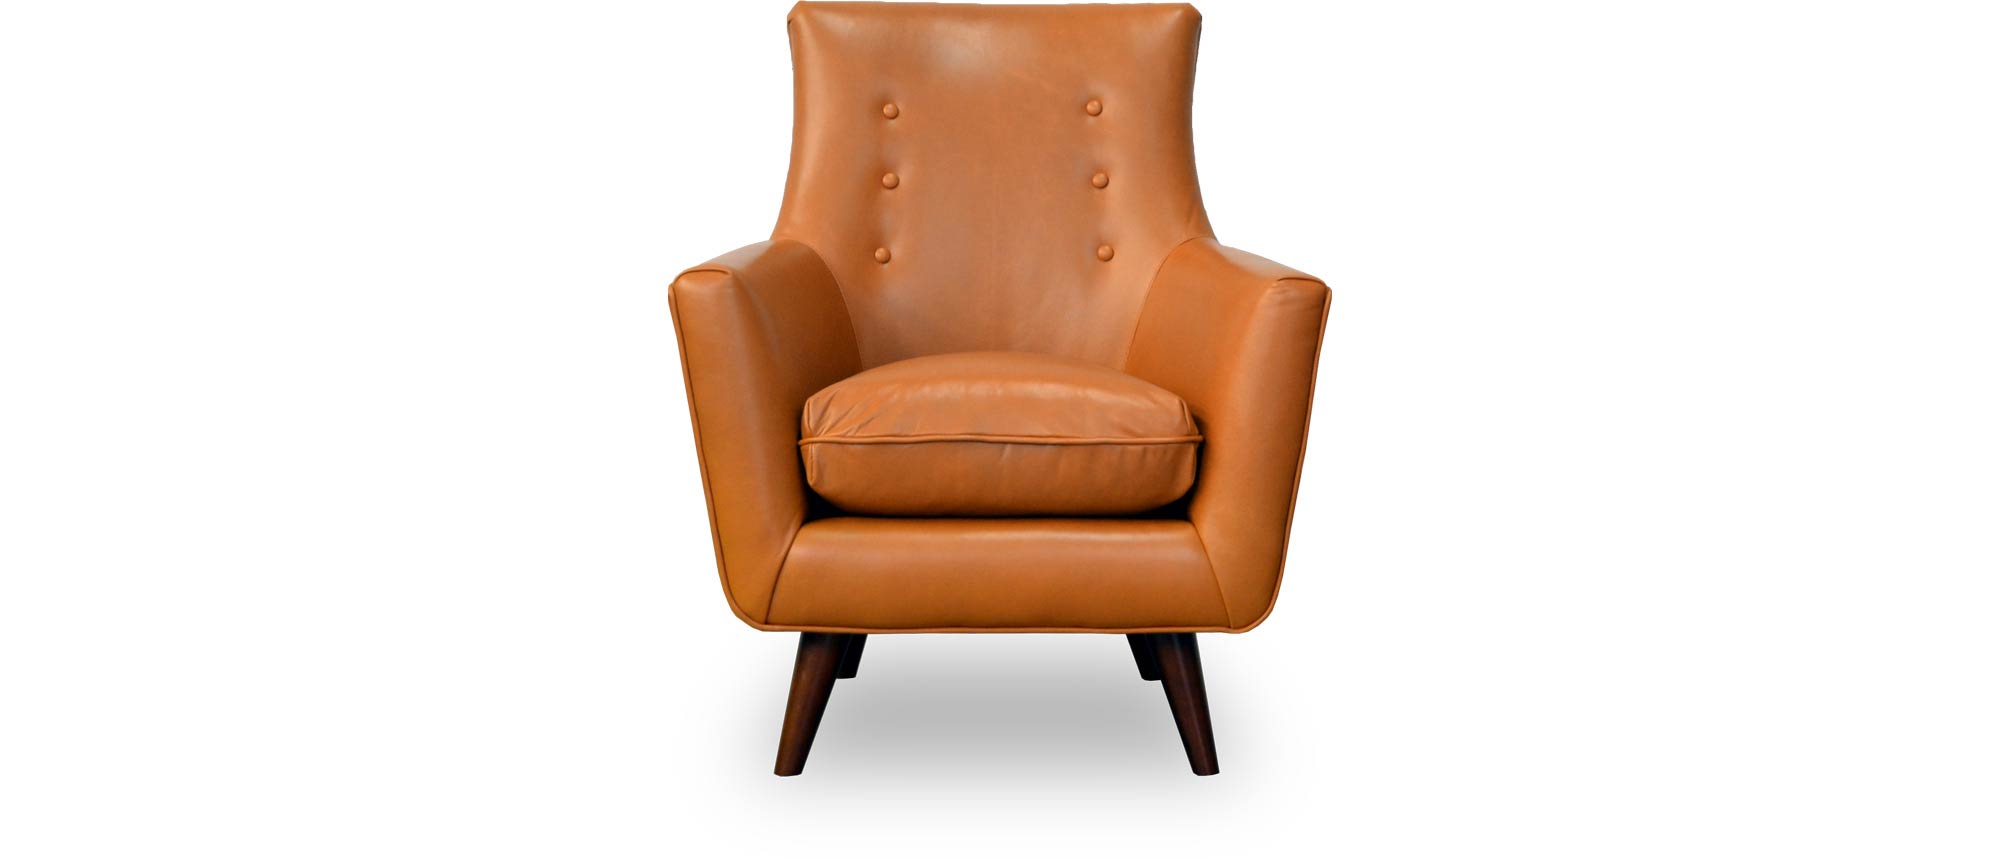 Gogo armchair in brown leather